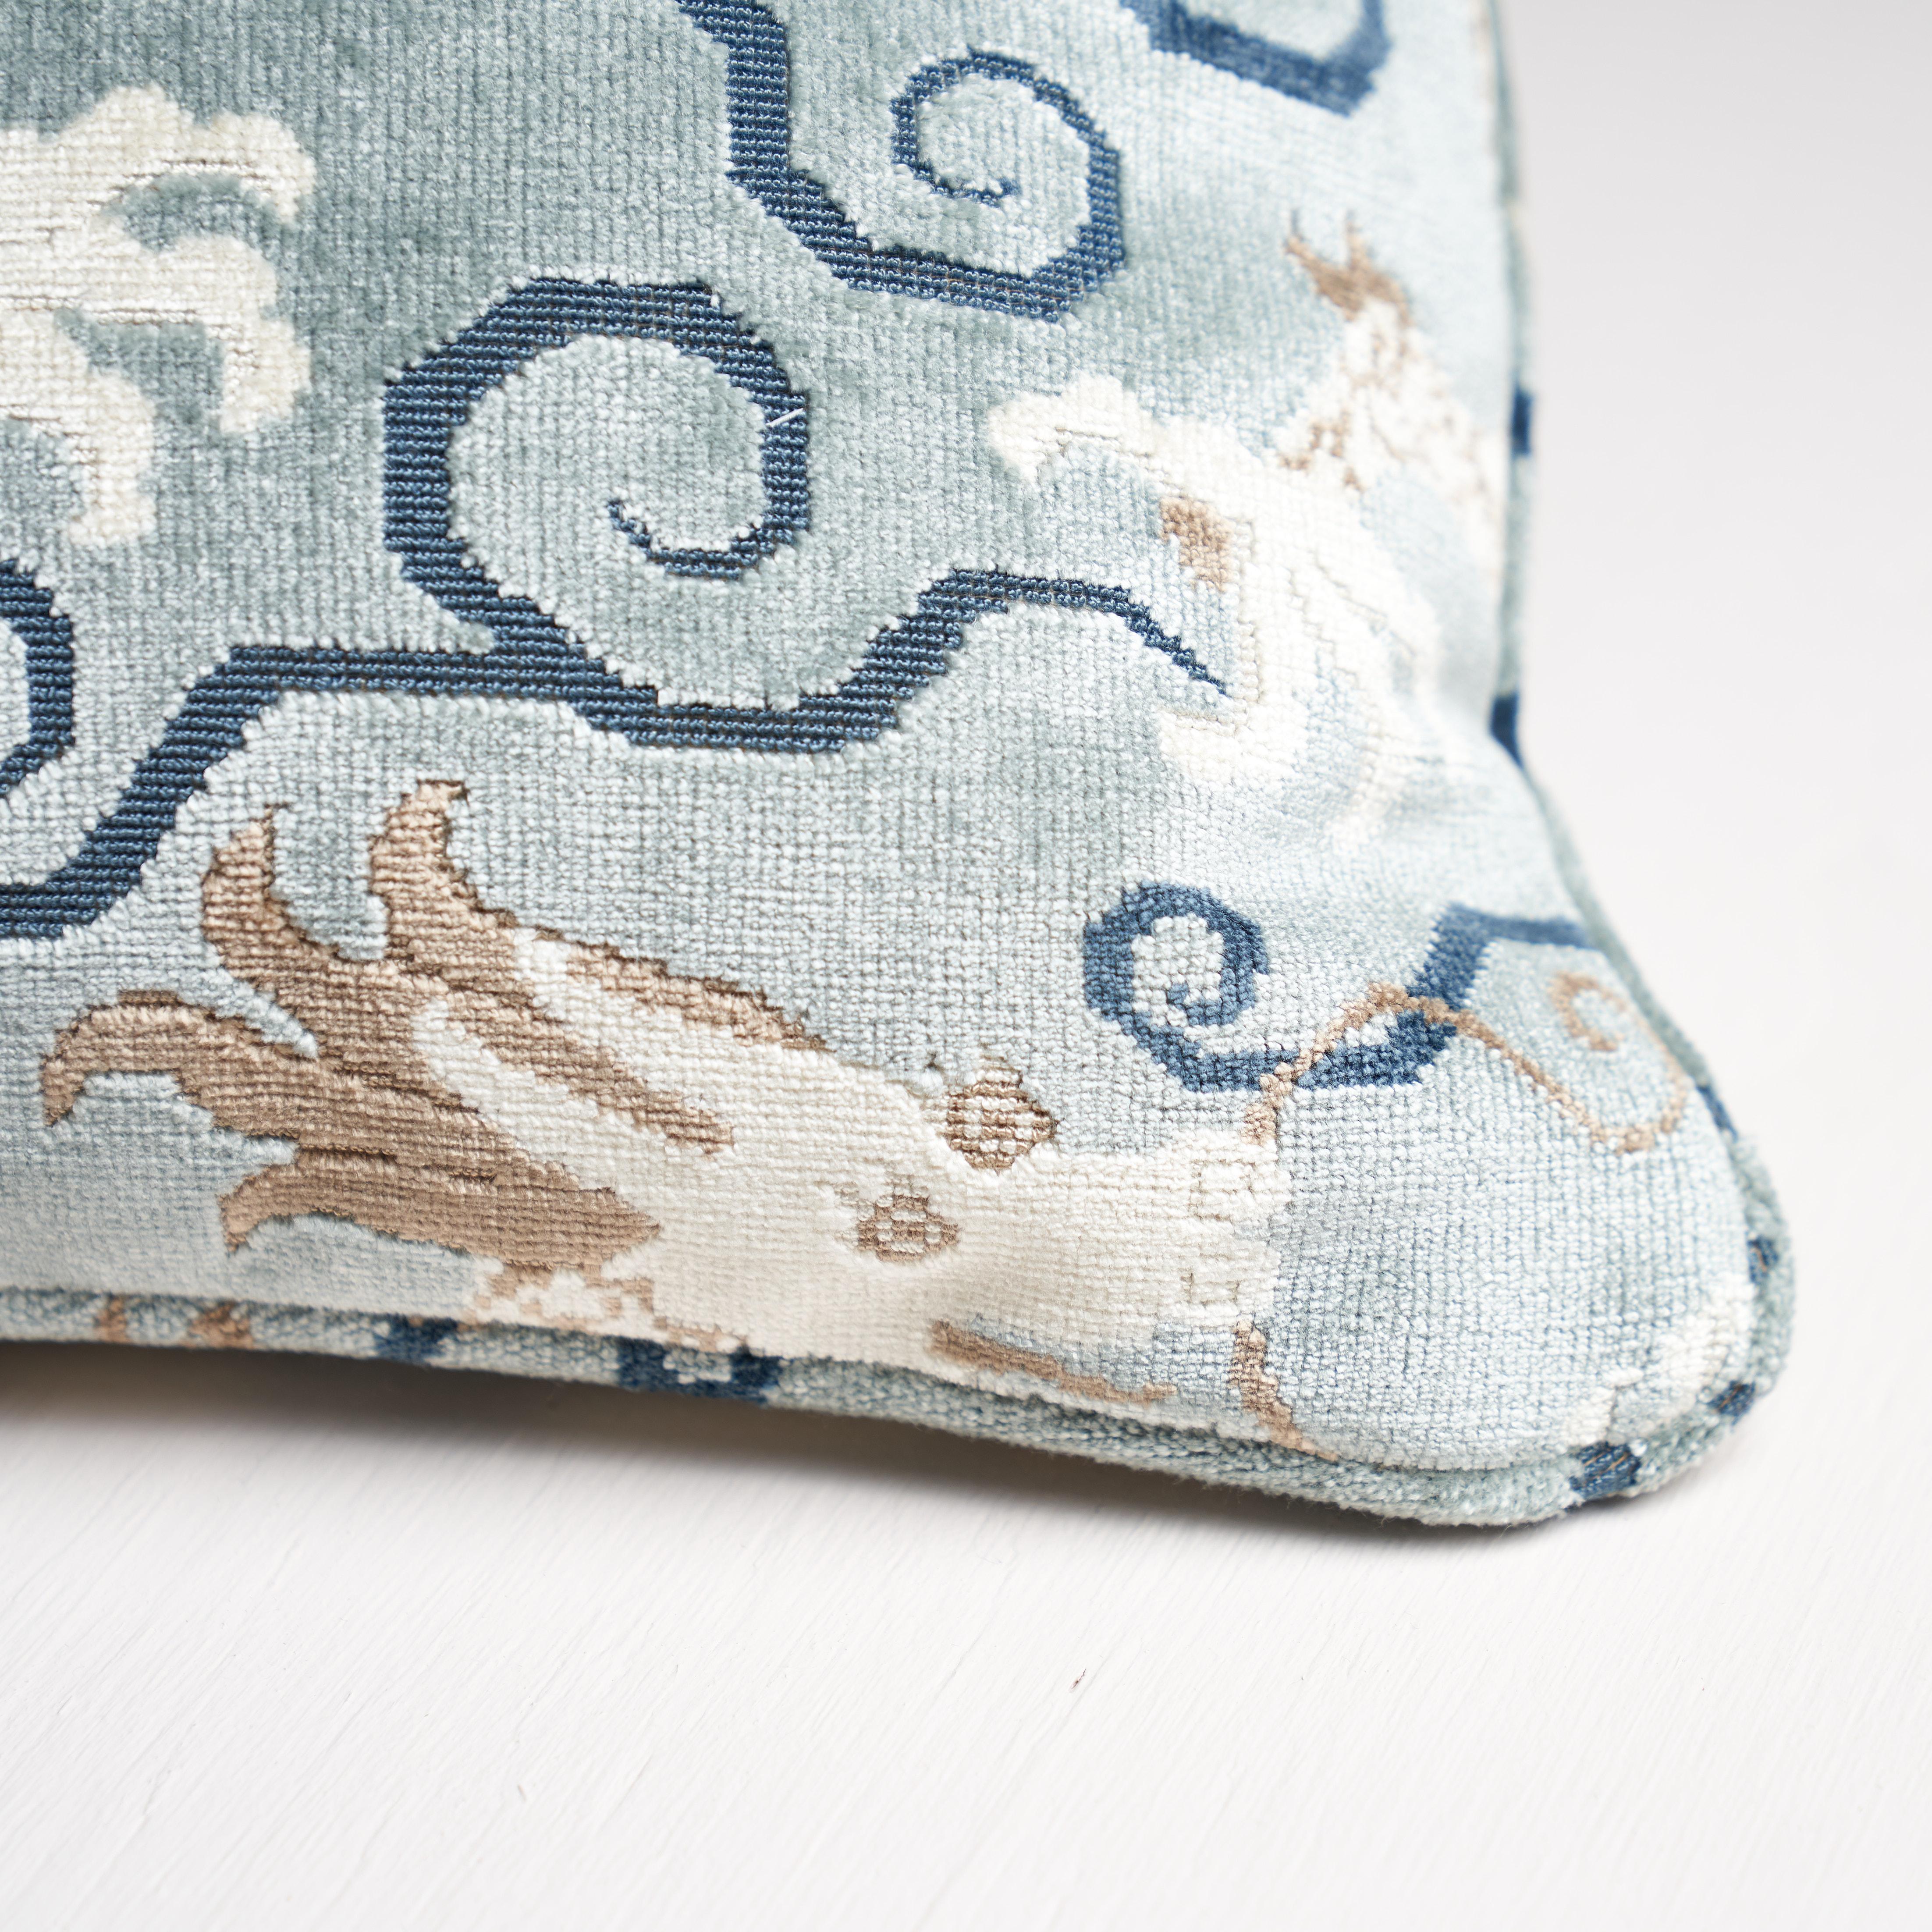 This pillow features Bixi Velvet with a self-welt finish. Inspired by chinoiserie motifs, this fabulous, fantastical dragon pattern was dreamt up by our in-house design studio. Dense pile and loop accents create a rich, textural allure. Pillow